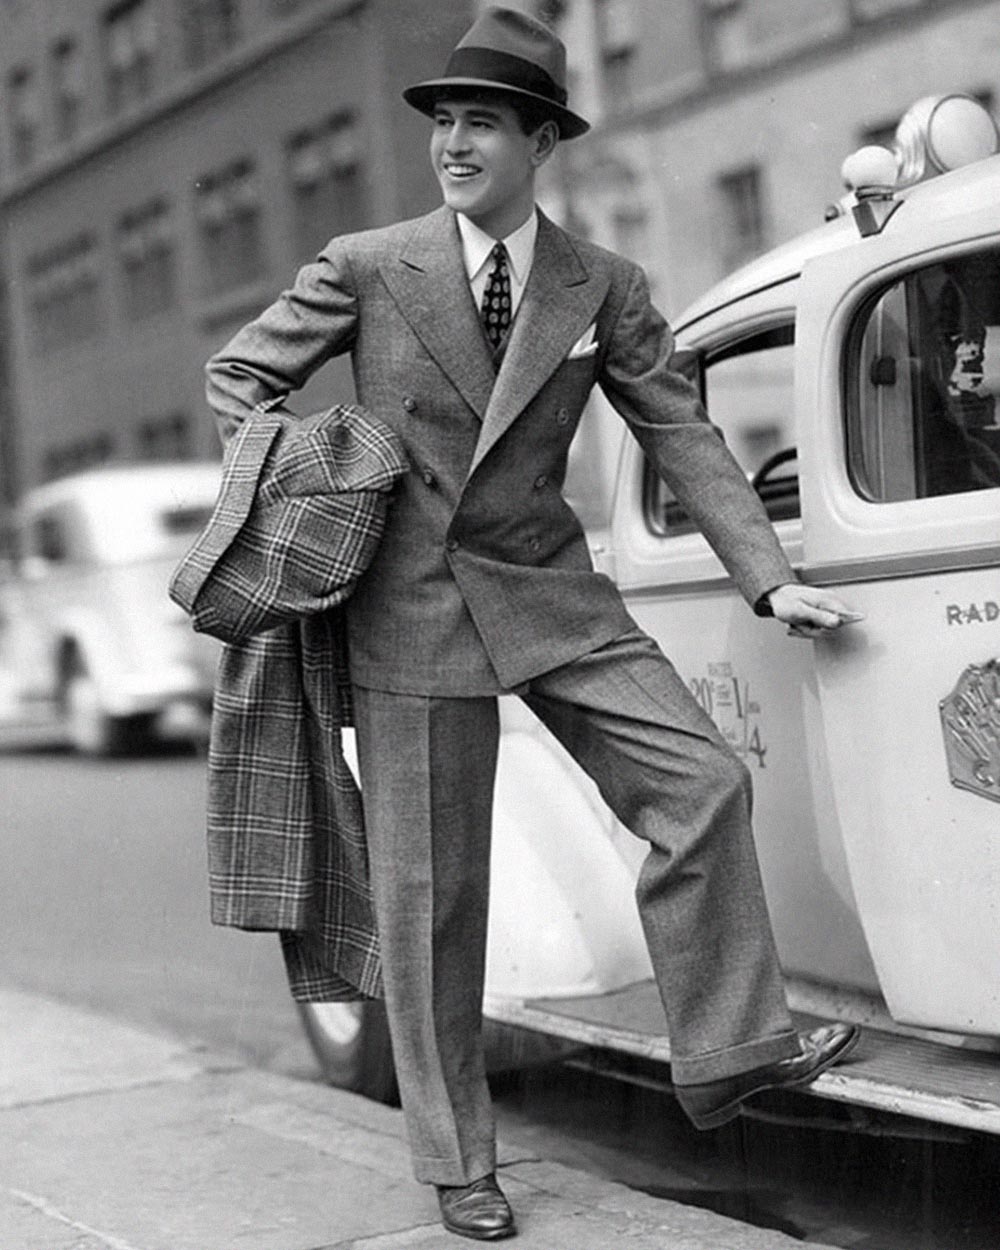 40s outfits for men